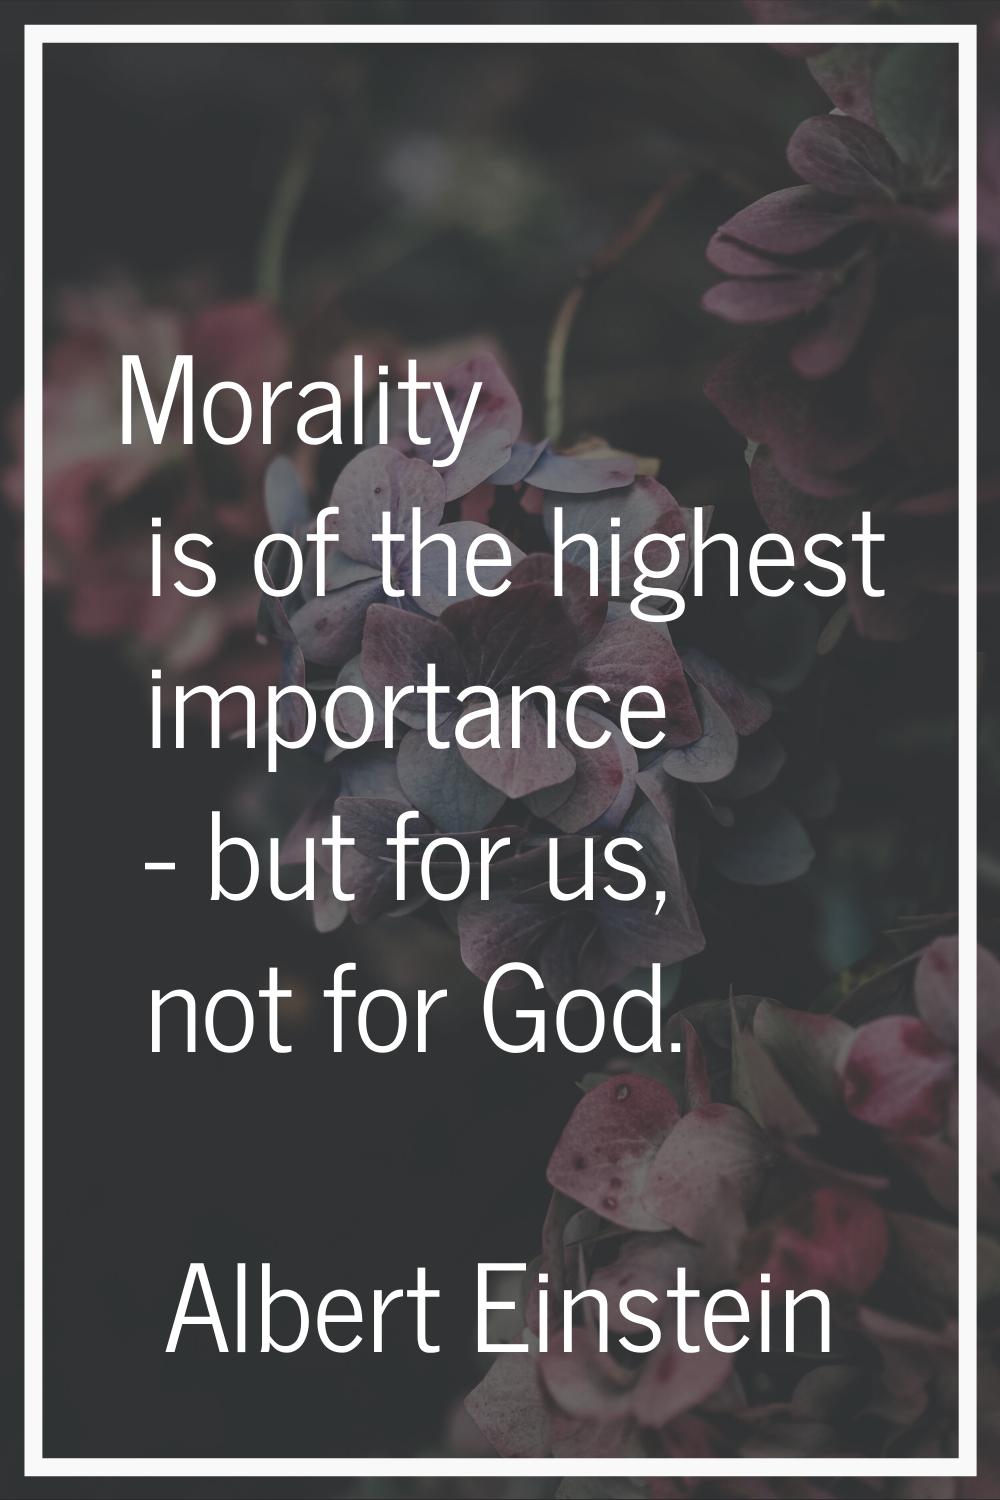 Morality is of the highest importance - but for us, not for God.